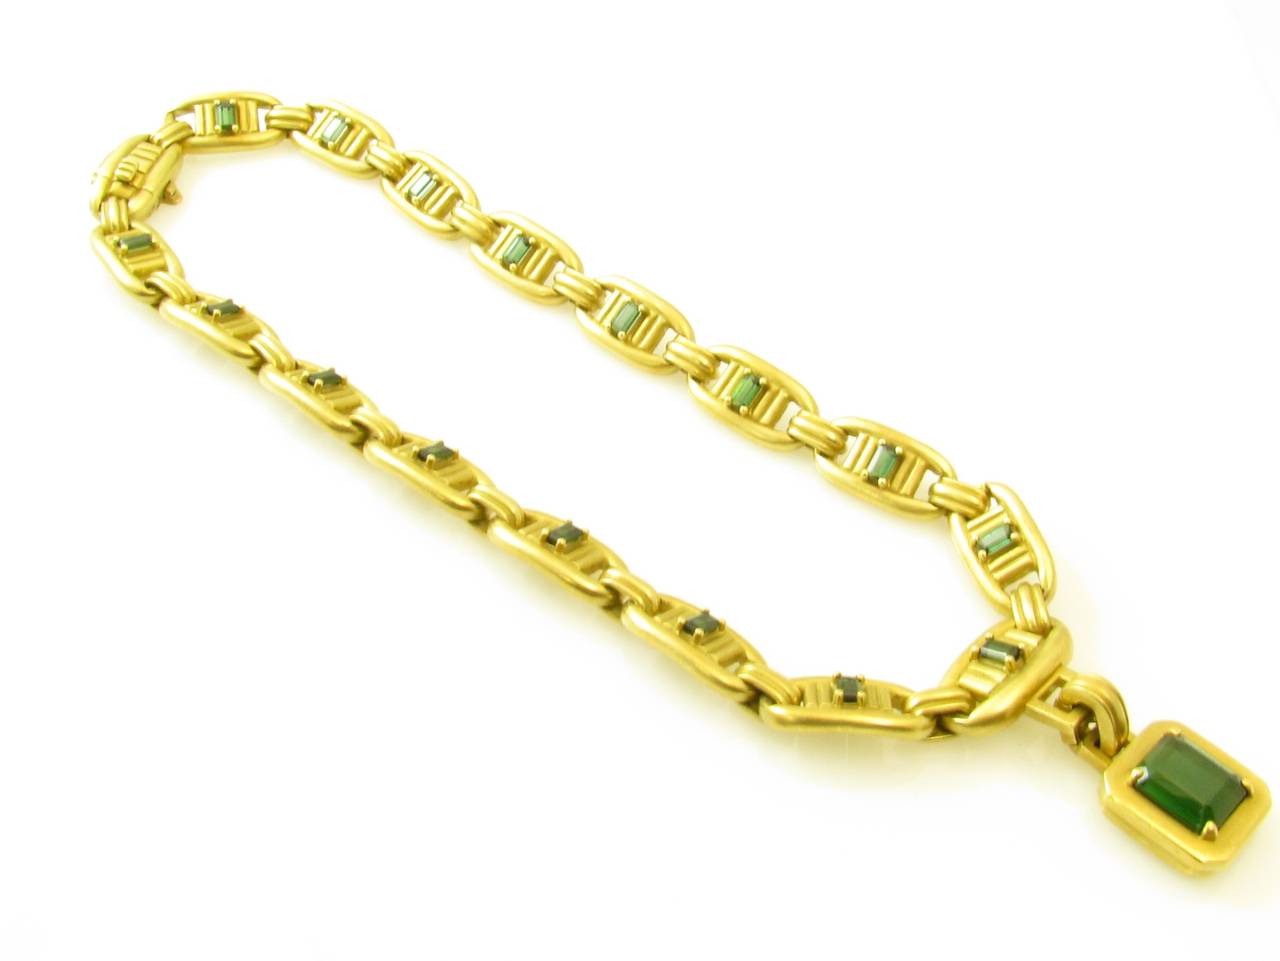 An 18 karat yellow gold and green tourmaline “Colonnade” necklace with detachable gold and green tourmaline pendant, signed Kieselstein Cord 1976 18K.  The necklace and pendant have a gross weight of approximately 150.0 grams.  The necklace measures